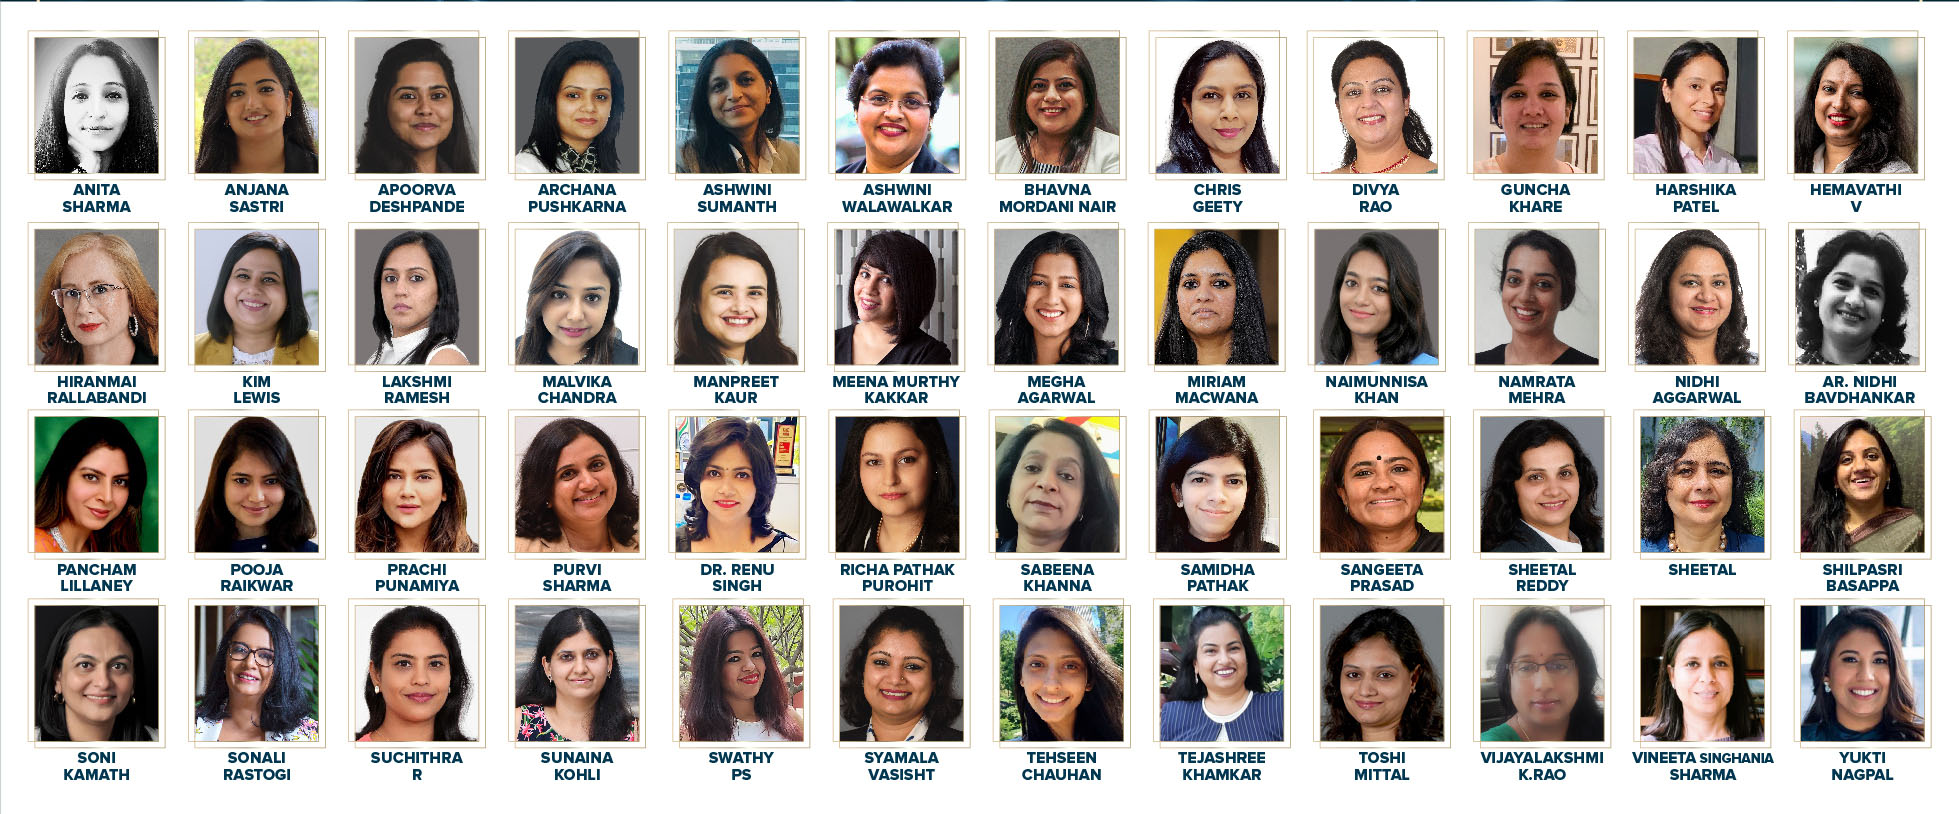 THE POWER WOMEN OF INDIAN REAL ESTATE